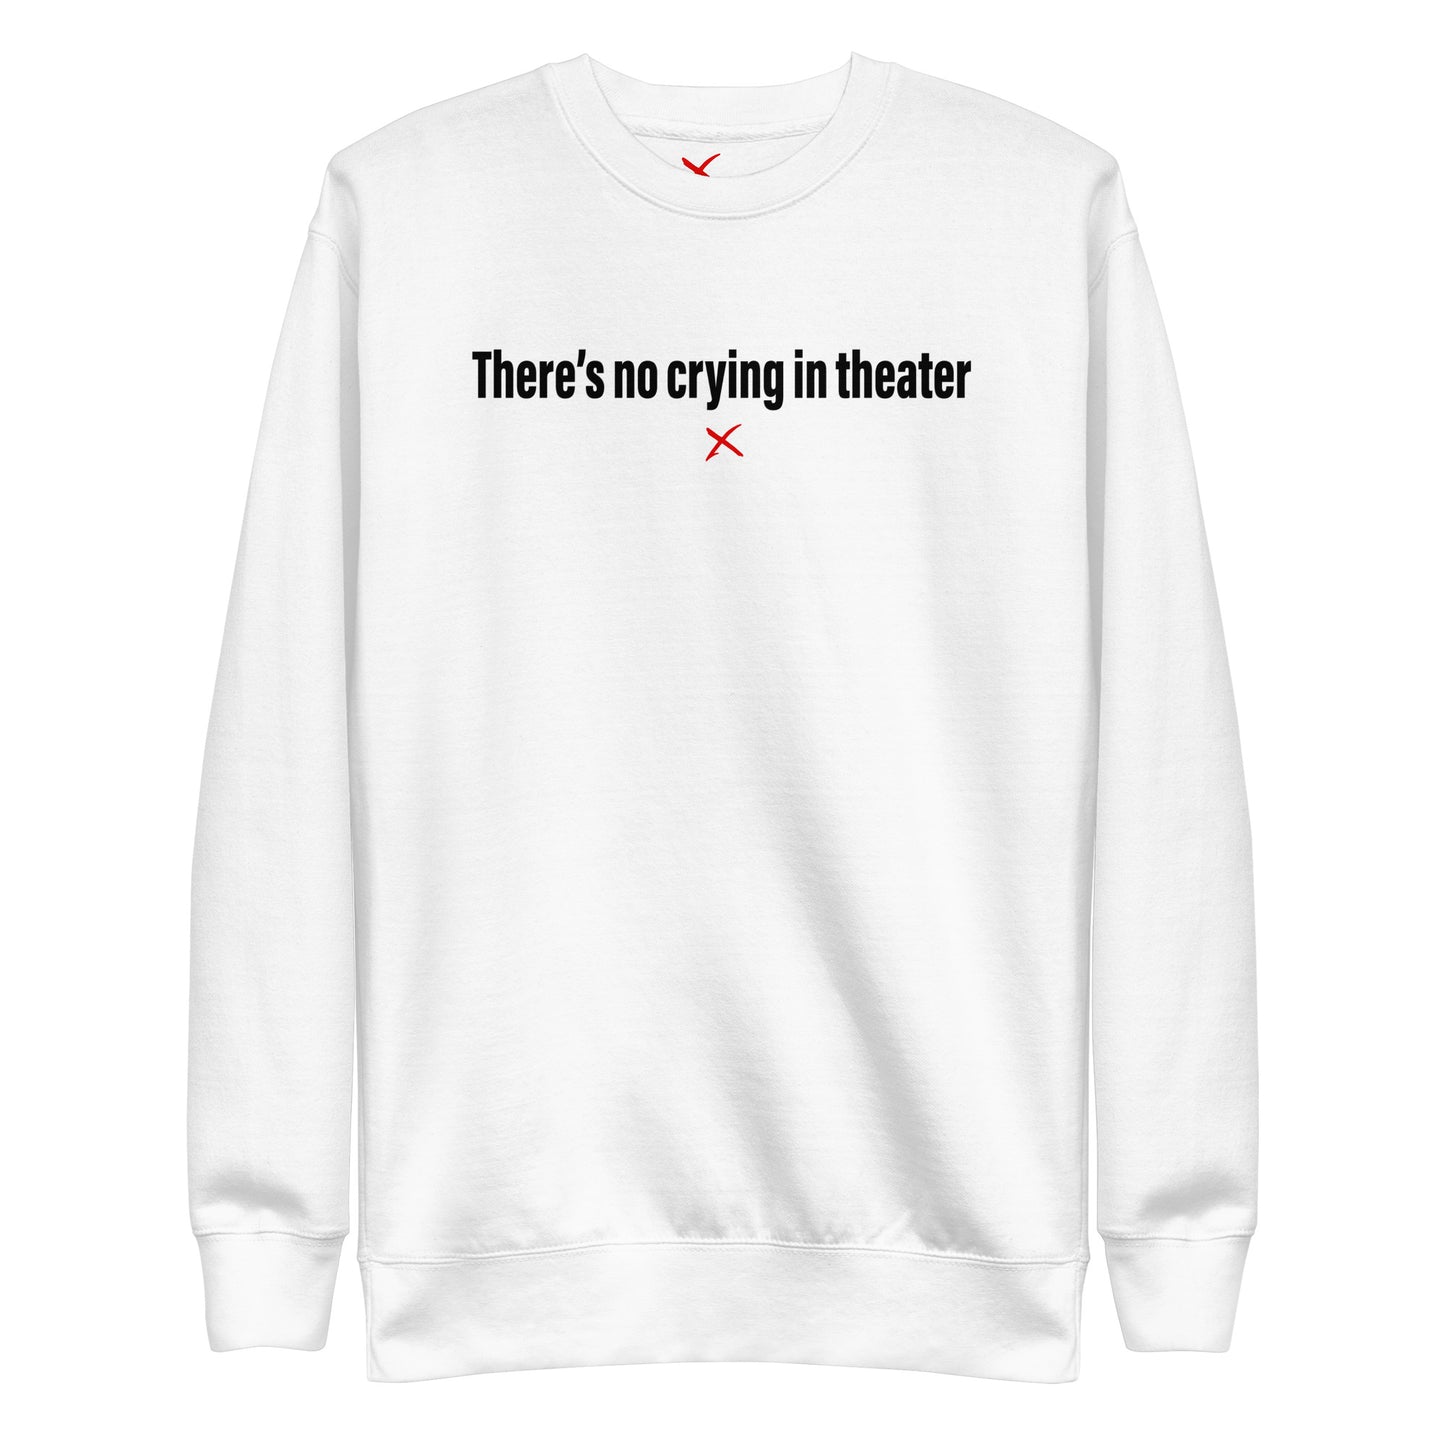 There's no crying in theater - Sweatshirt